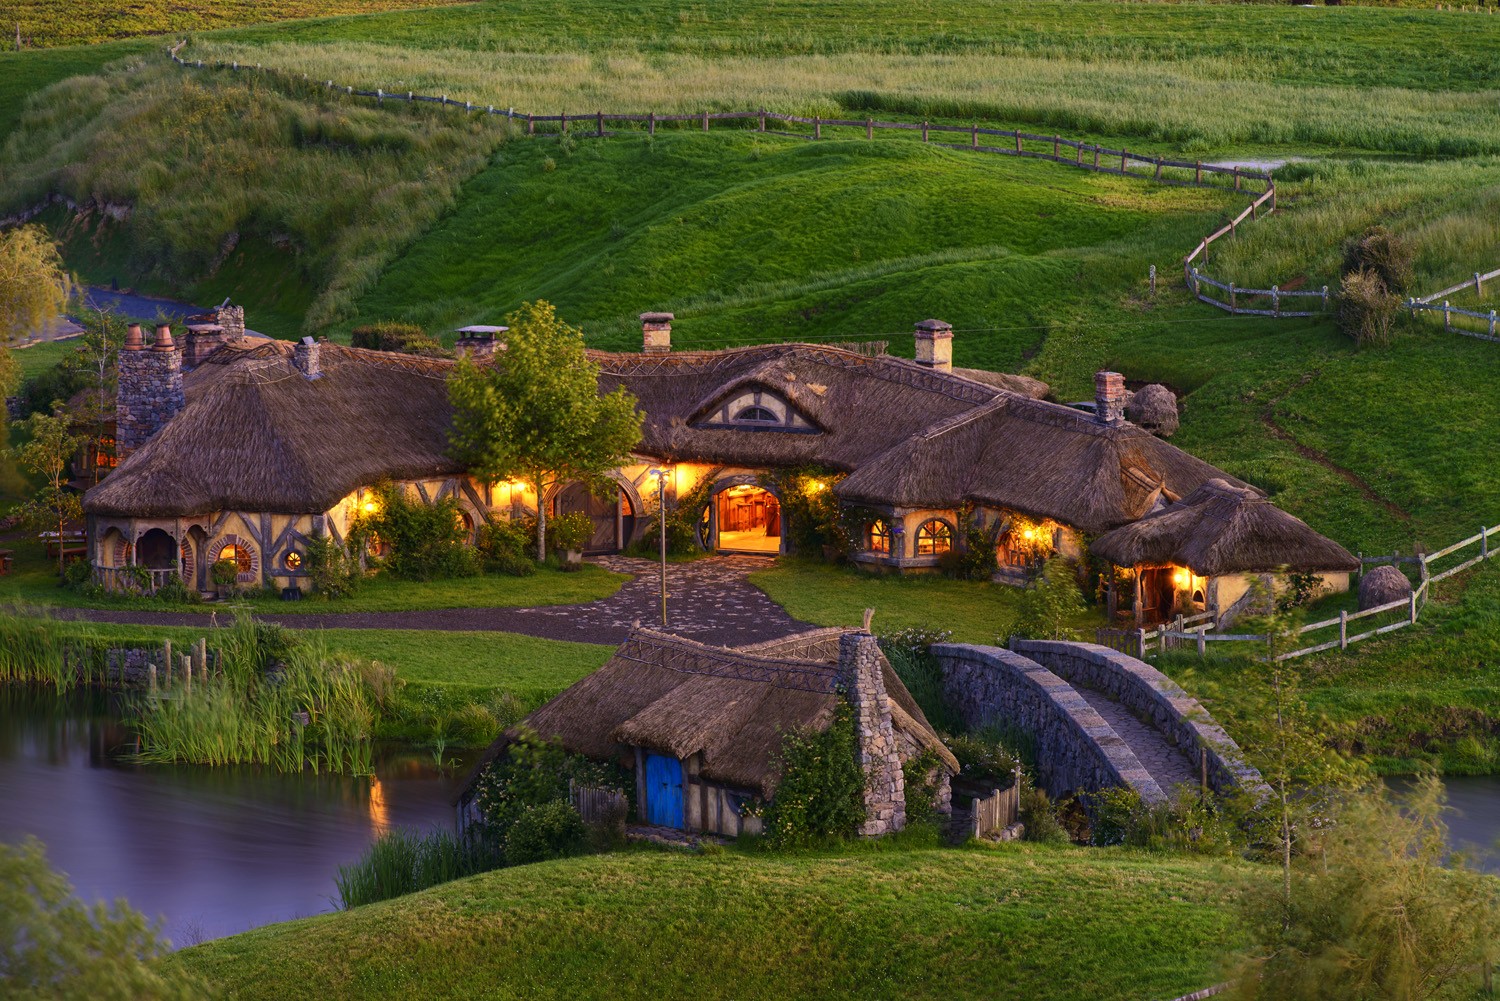 nature, Landscape, Trees, House, Field, New Zealand, Hobbiton, The Lord of the Rings, Lights, Grass, Bridge, River, Fence, Fairy tale Wallpaper